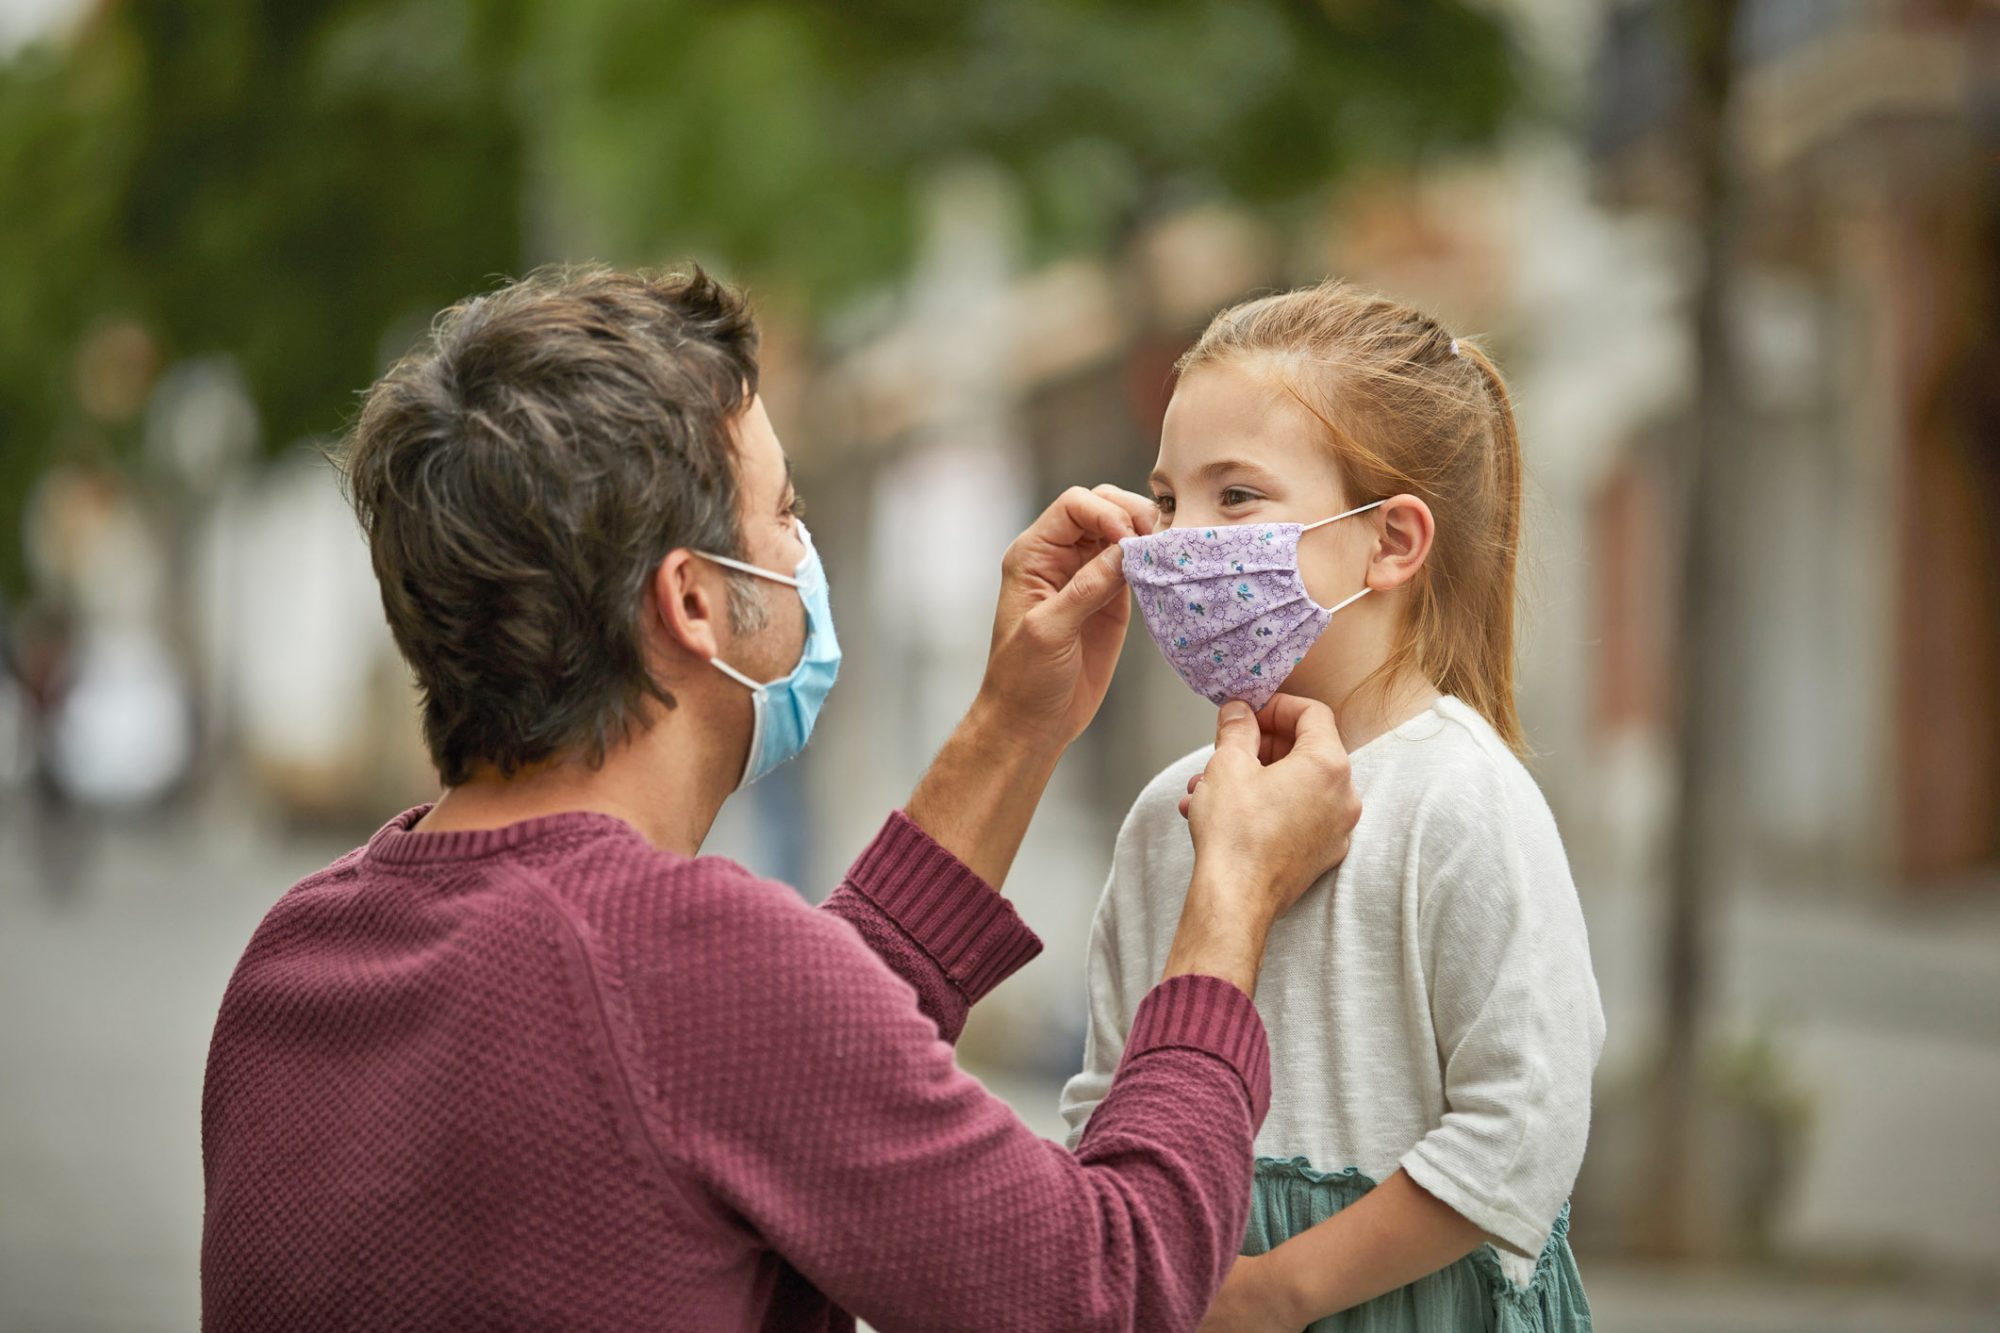 An image of a father putting a mask on his daughter.